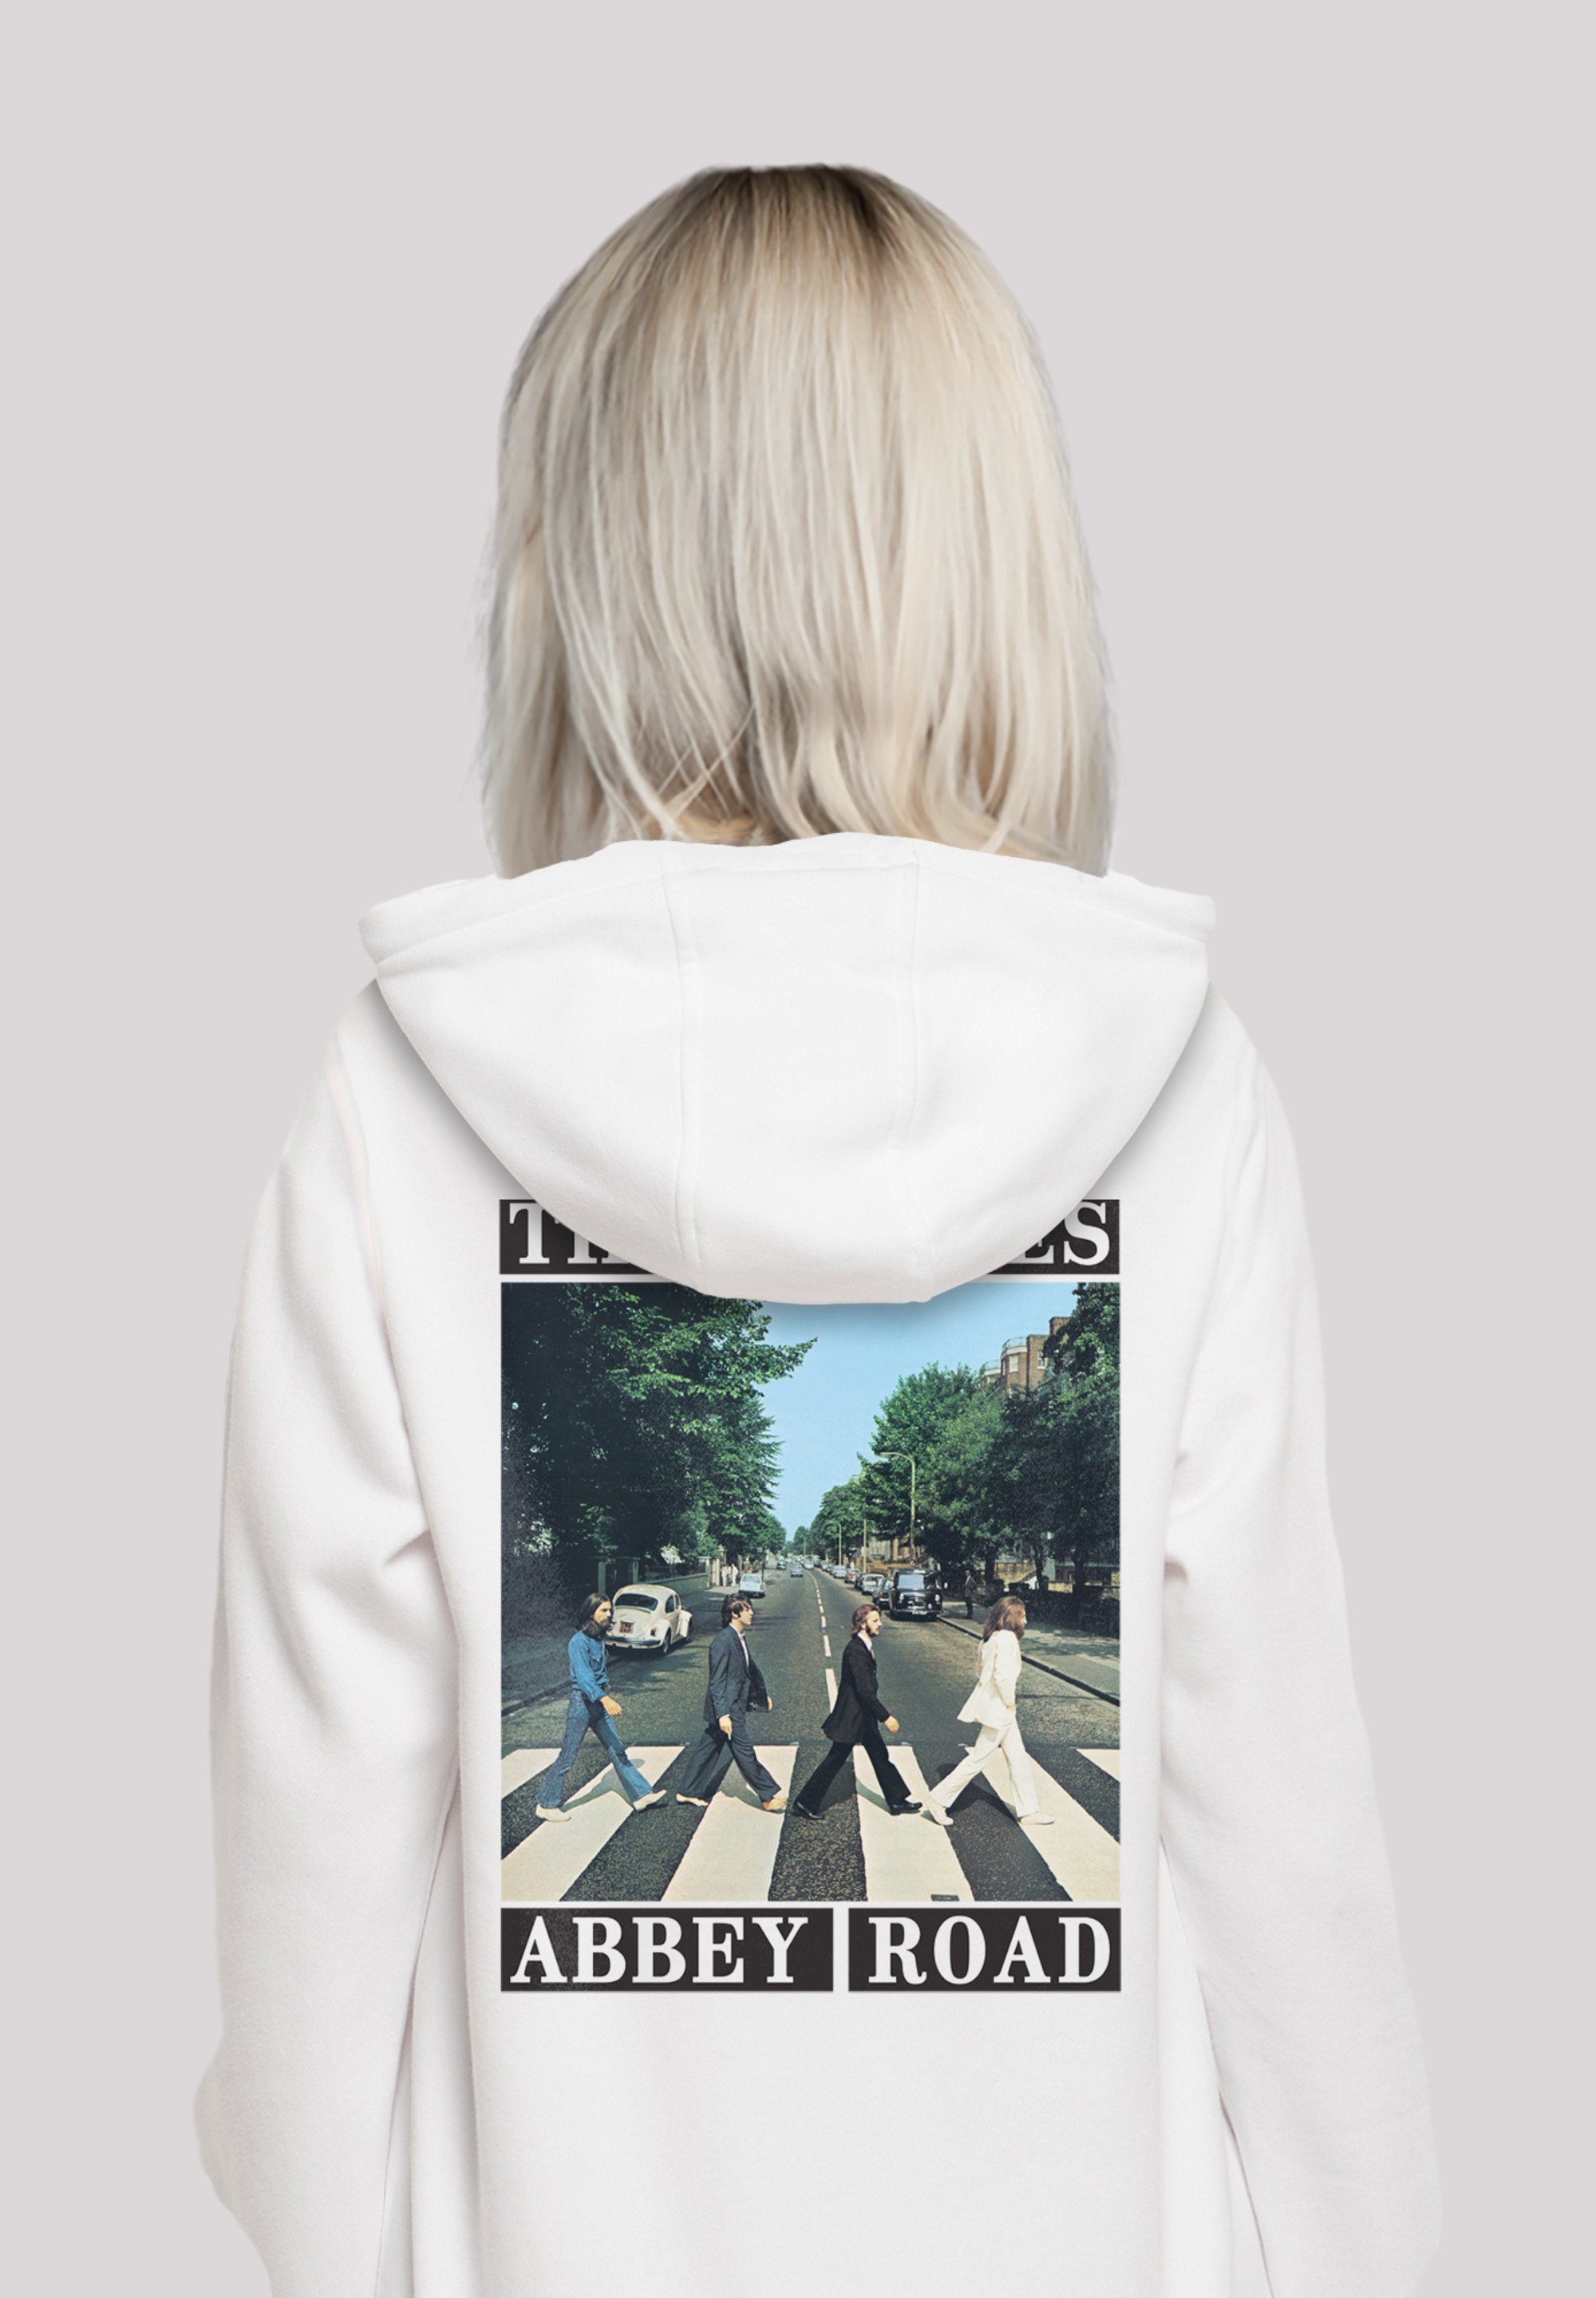 F4NT4STIC Kapuzenpullover The Beatles Abbey Road Rock Musik Band Hoodie, Warm, Bequem weiß